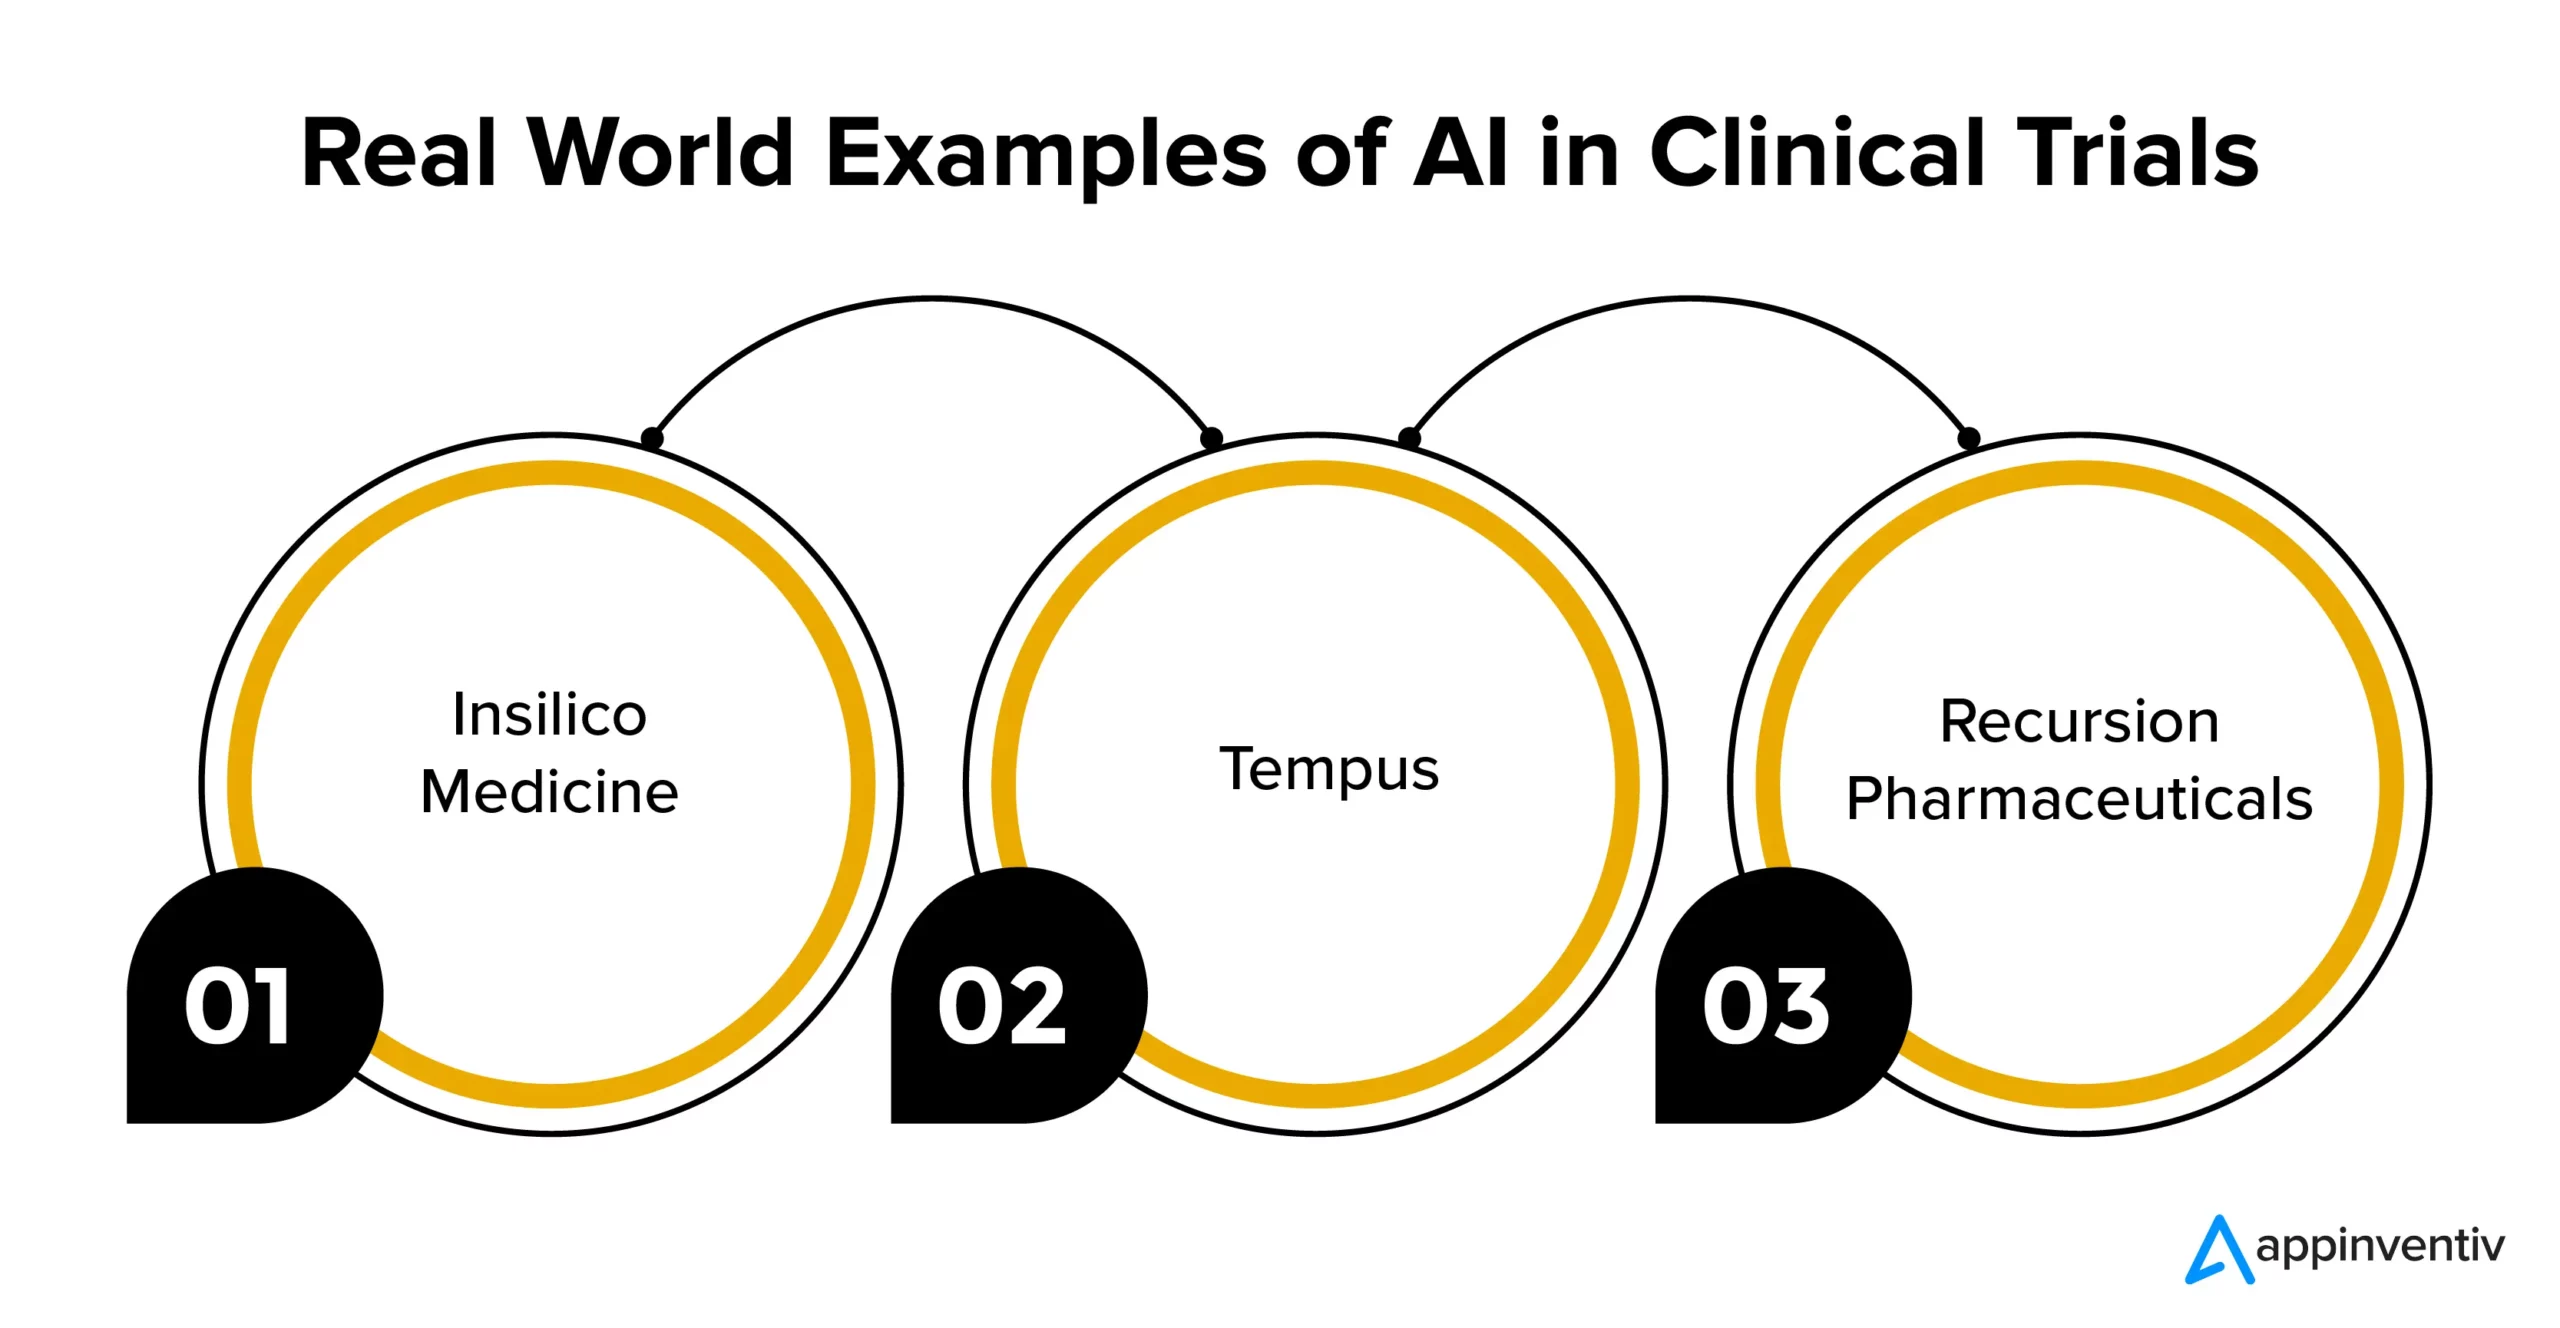 Real World Examples of AI in Clinical Trials